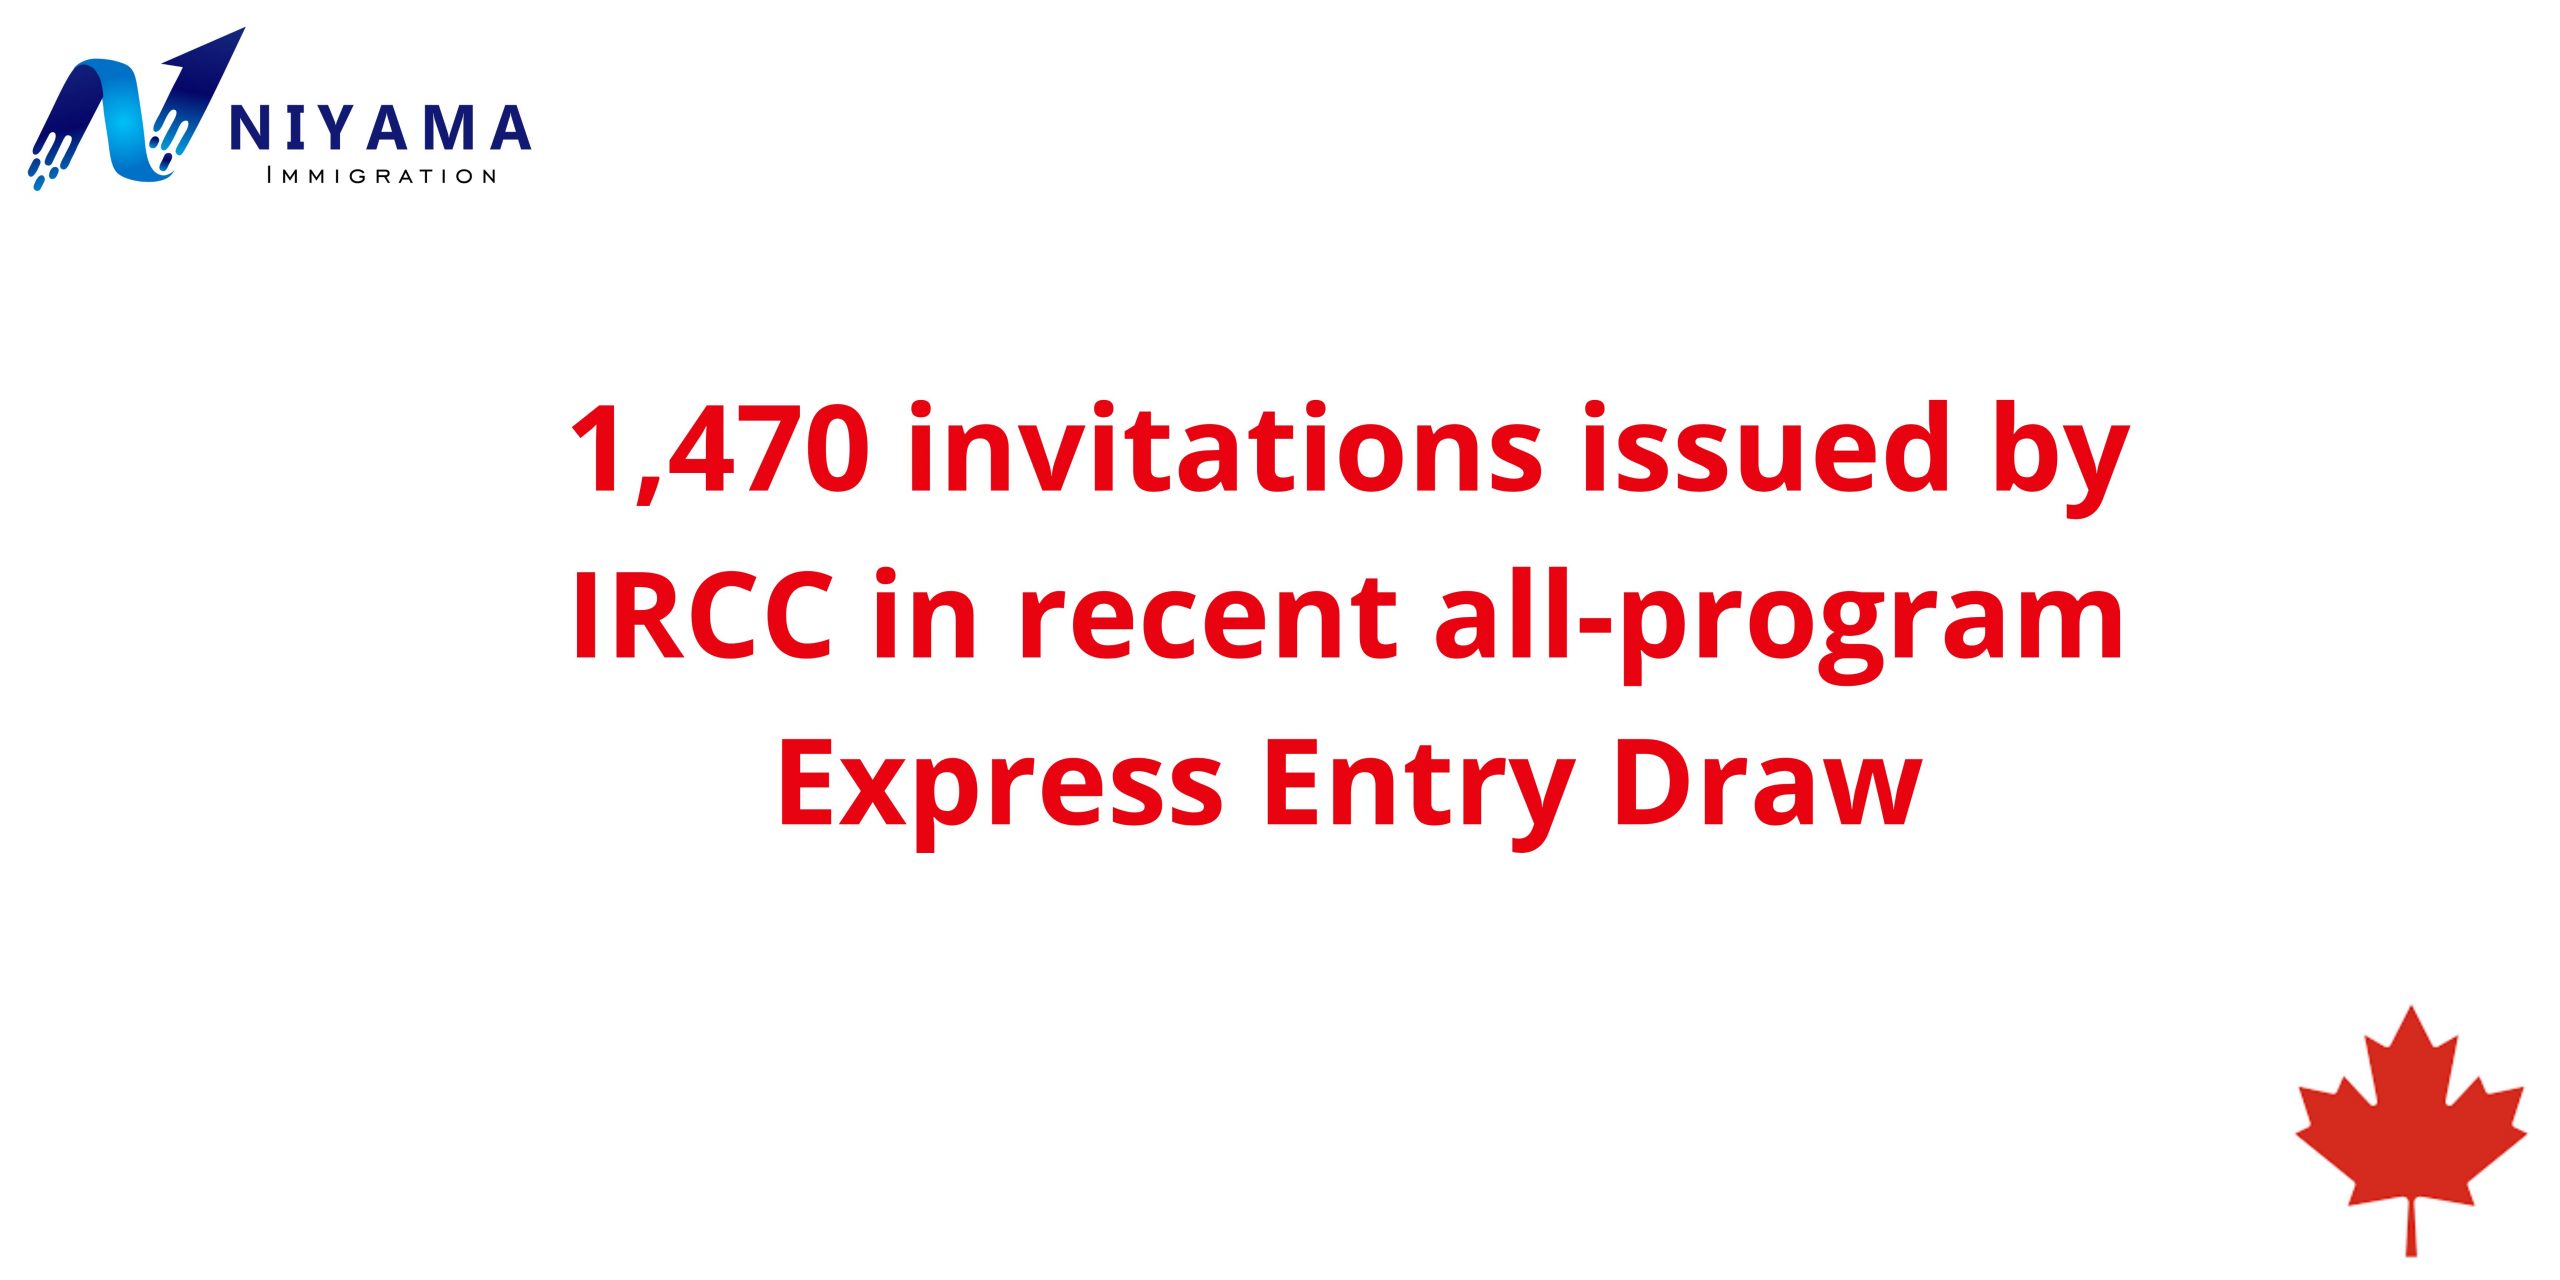 Express Entry Draw: 1,470 New Applications Invited